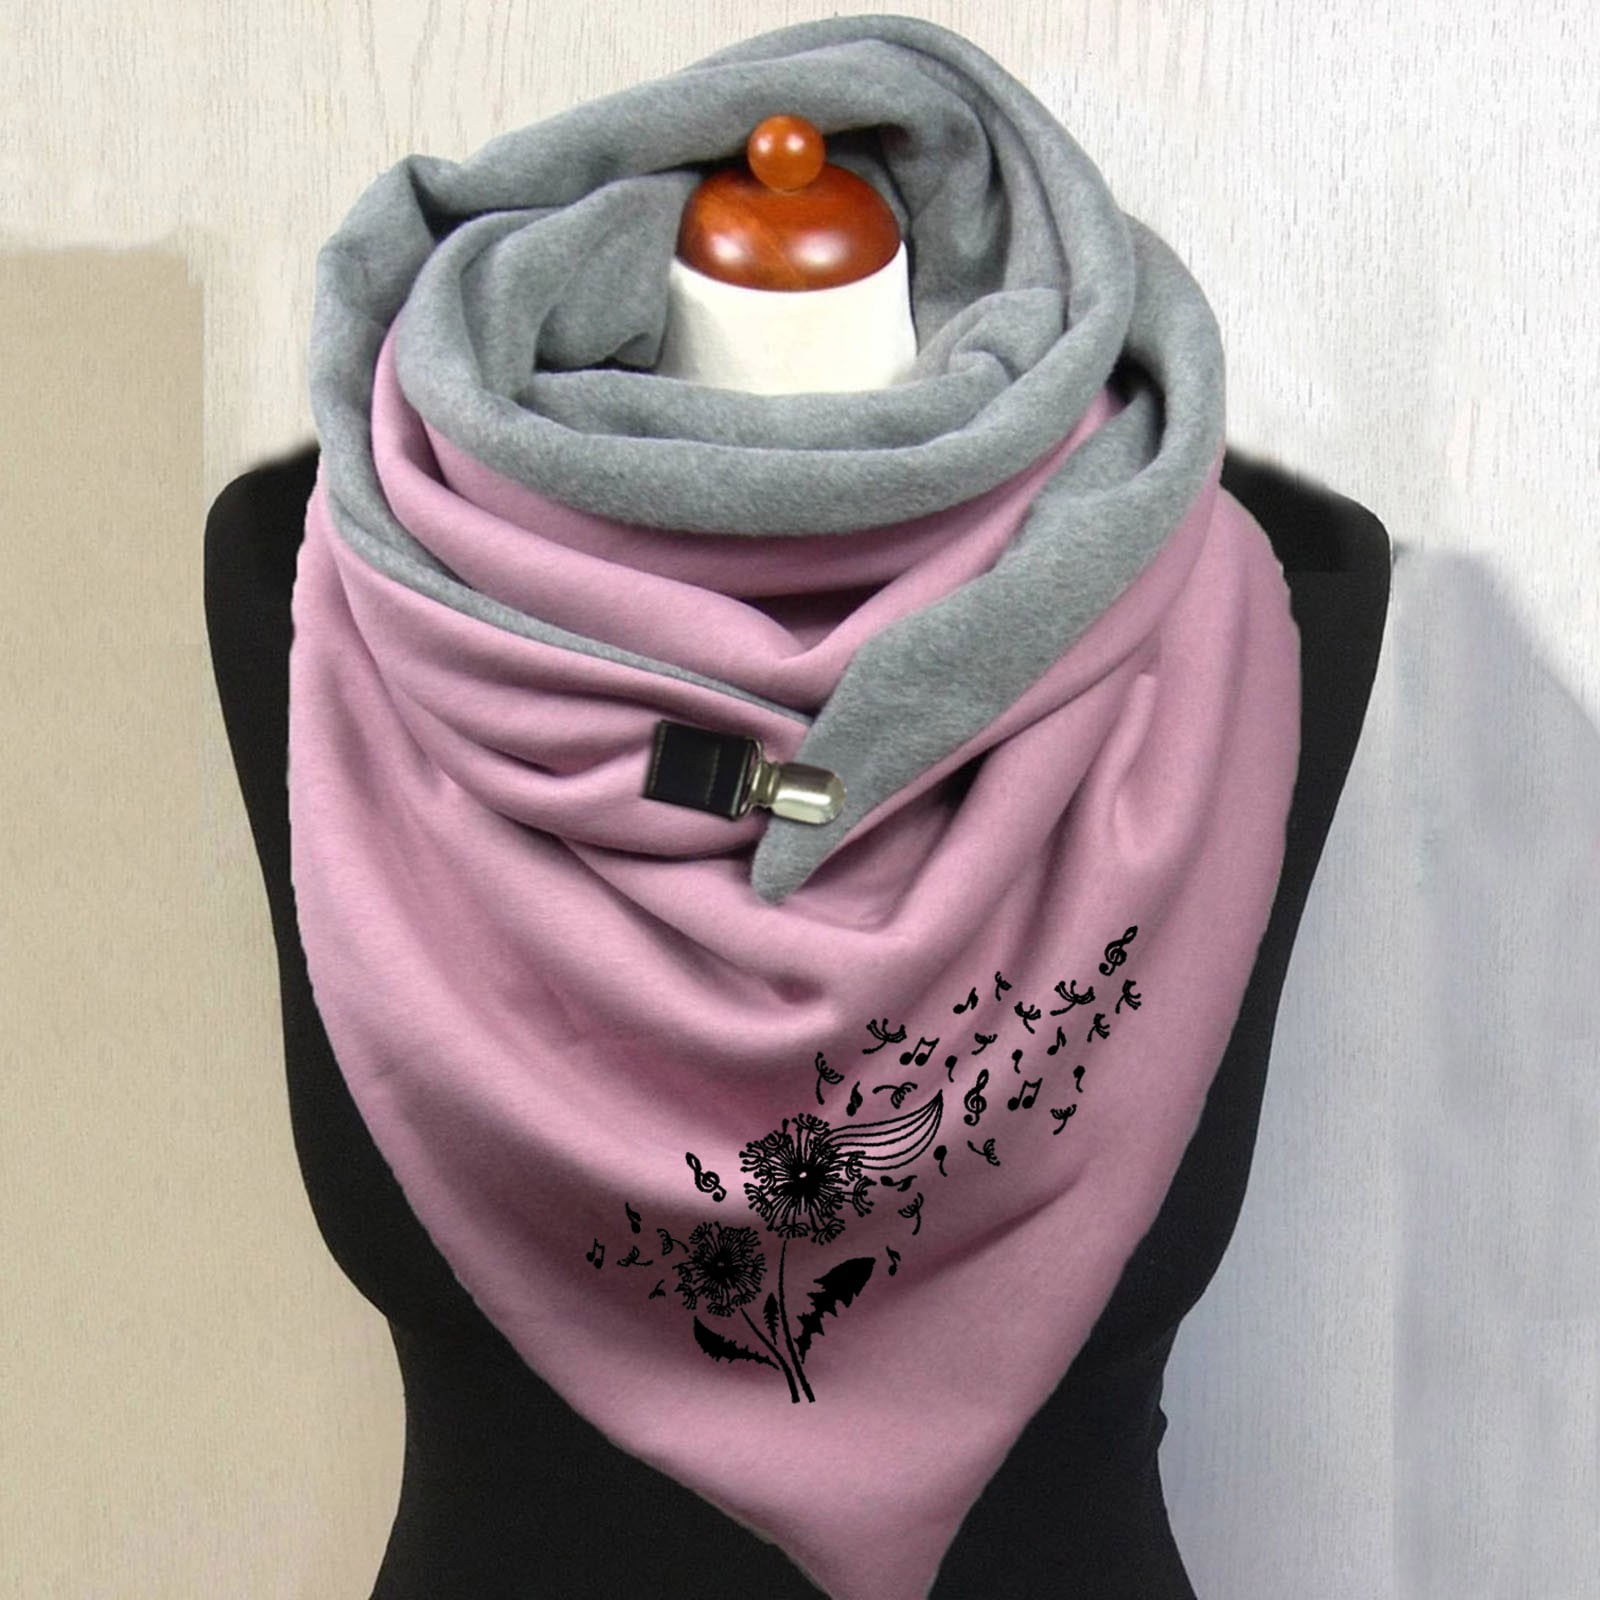  House of Morgan Pewter - Handmade Swirly Heart Scarf Ring Gifts  - Large Pewter Scarf Slide - Women Scarf Clip for Scarves : Handmade  Products